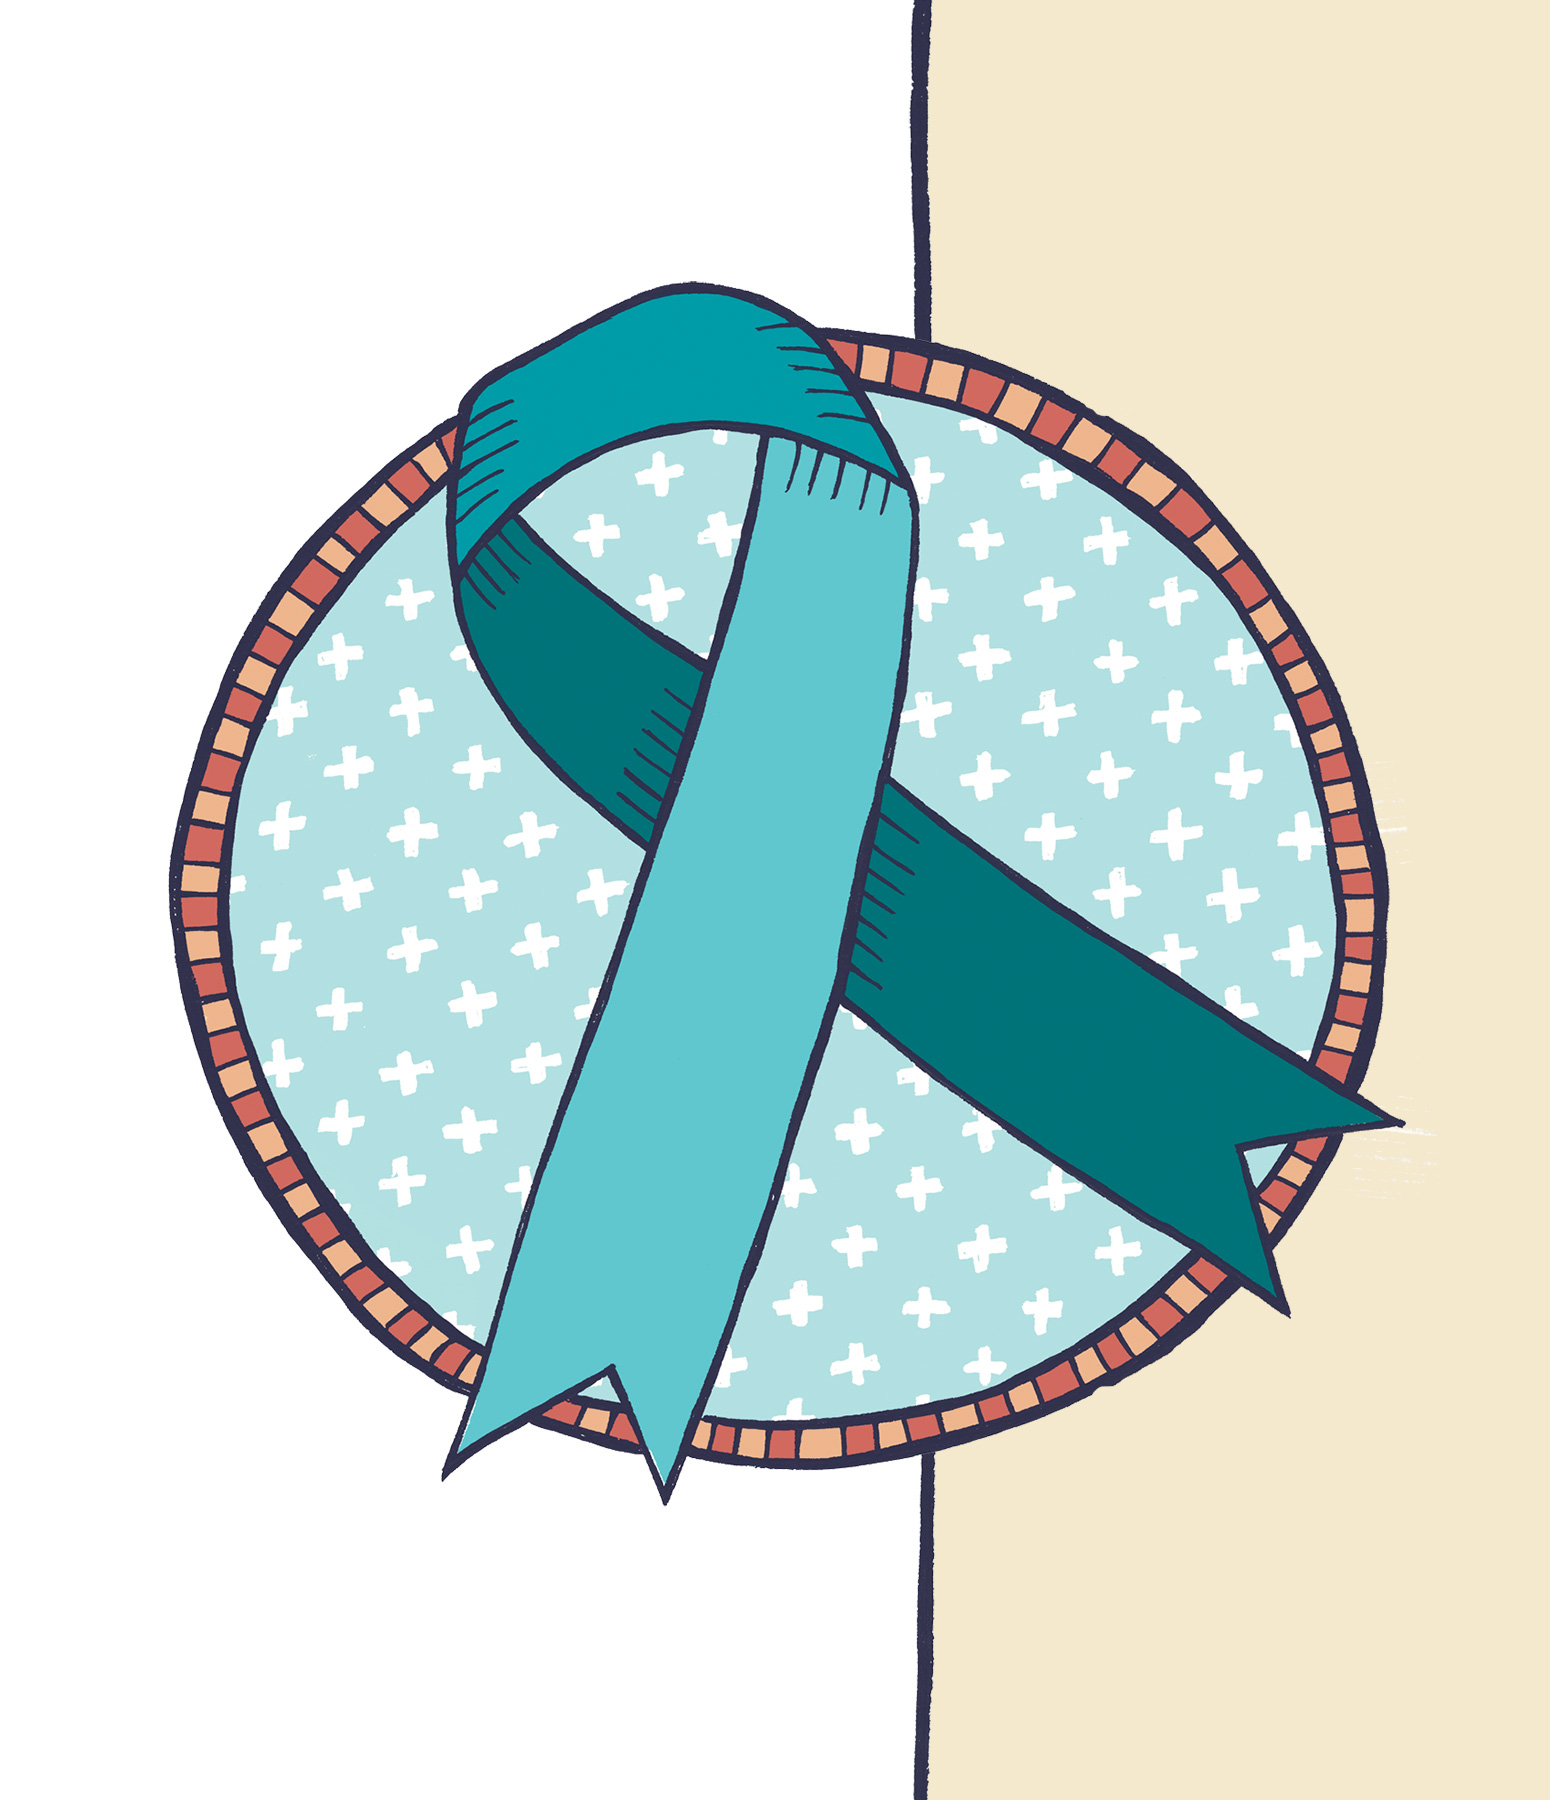 Self testing champions image of a teal coloured ribbon